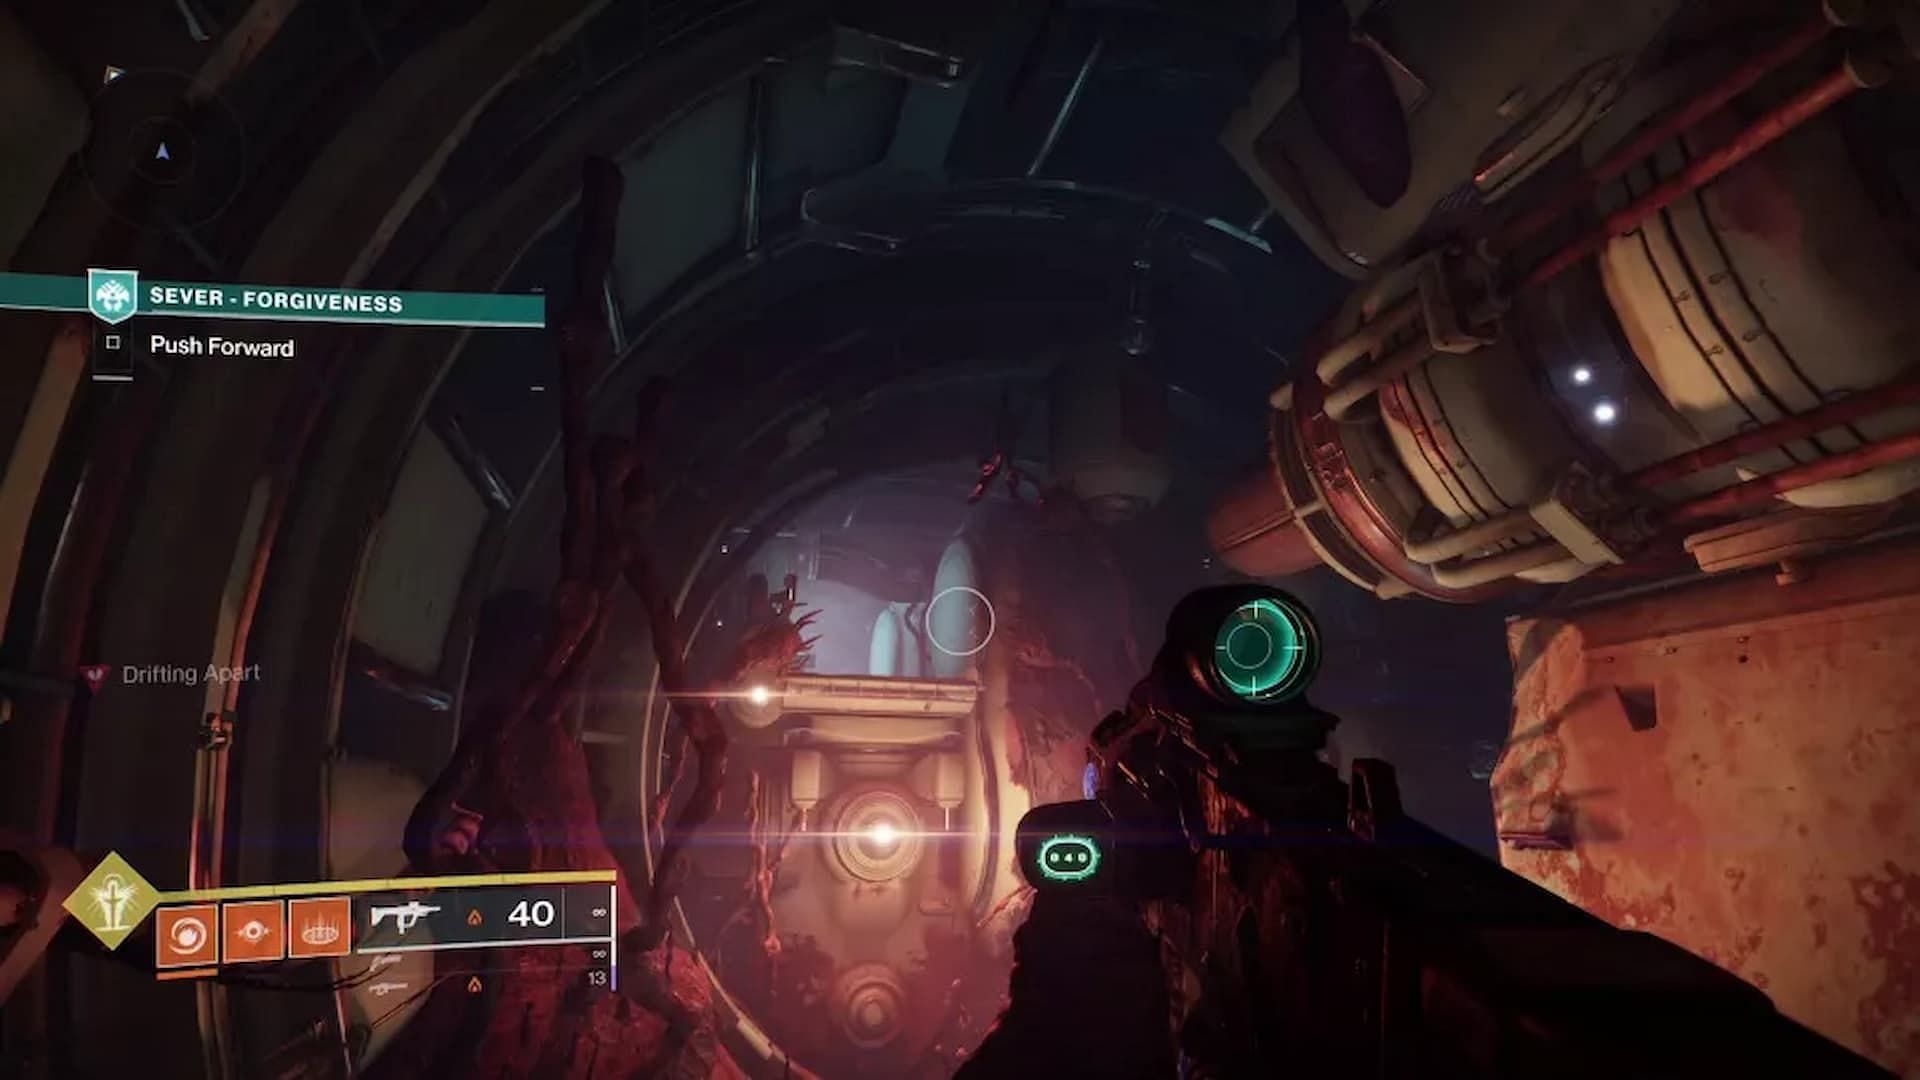 The room with the orange lights is where the bobblehead is located (Image via Bungie)